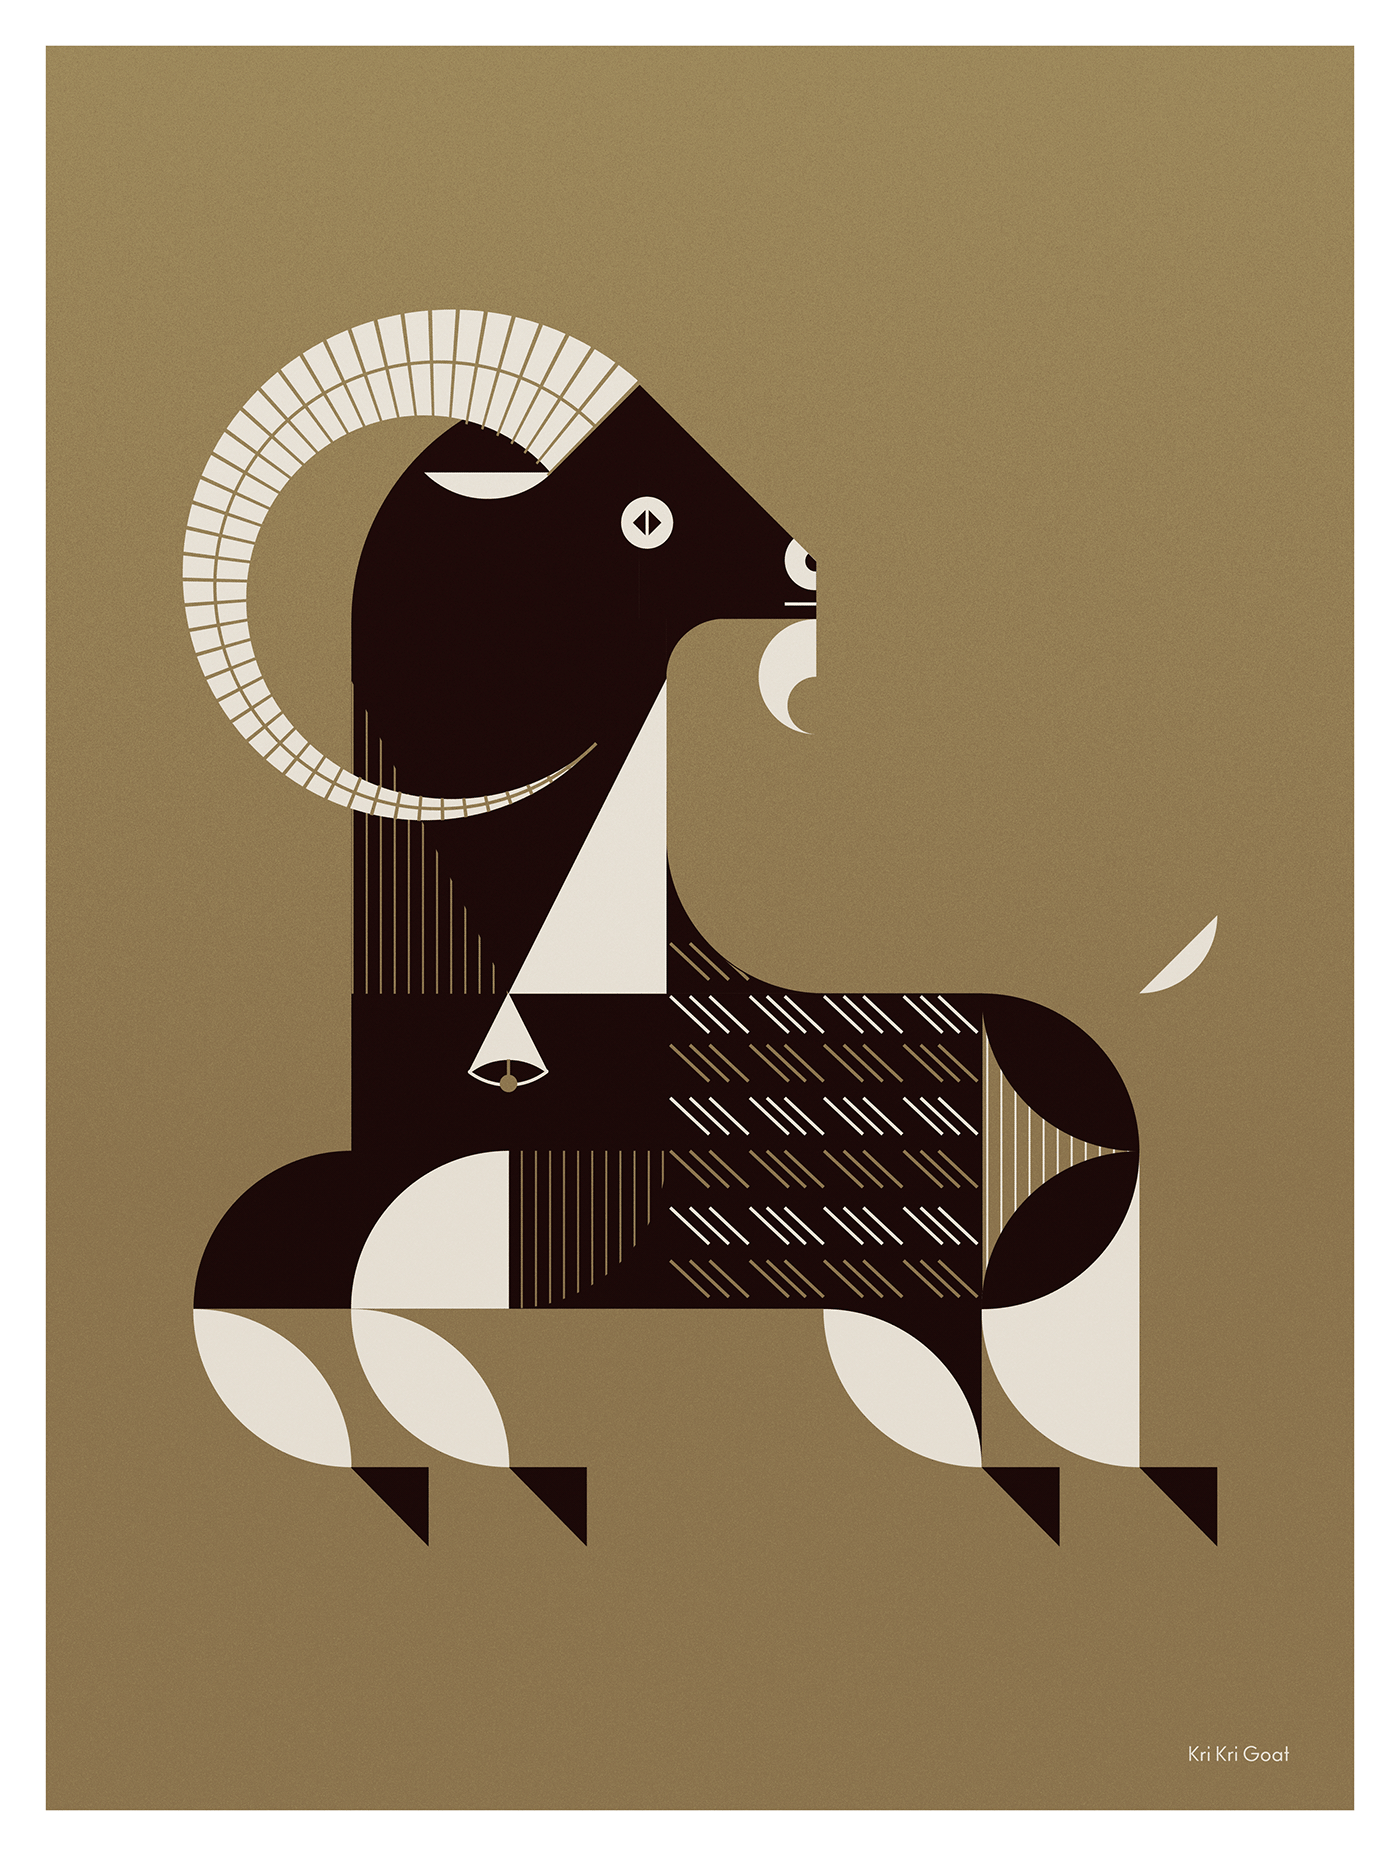 Geometric animals, poster series from Studio Soleil, that created for a various of projects. Kri Kri